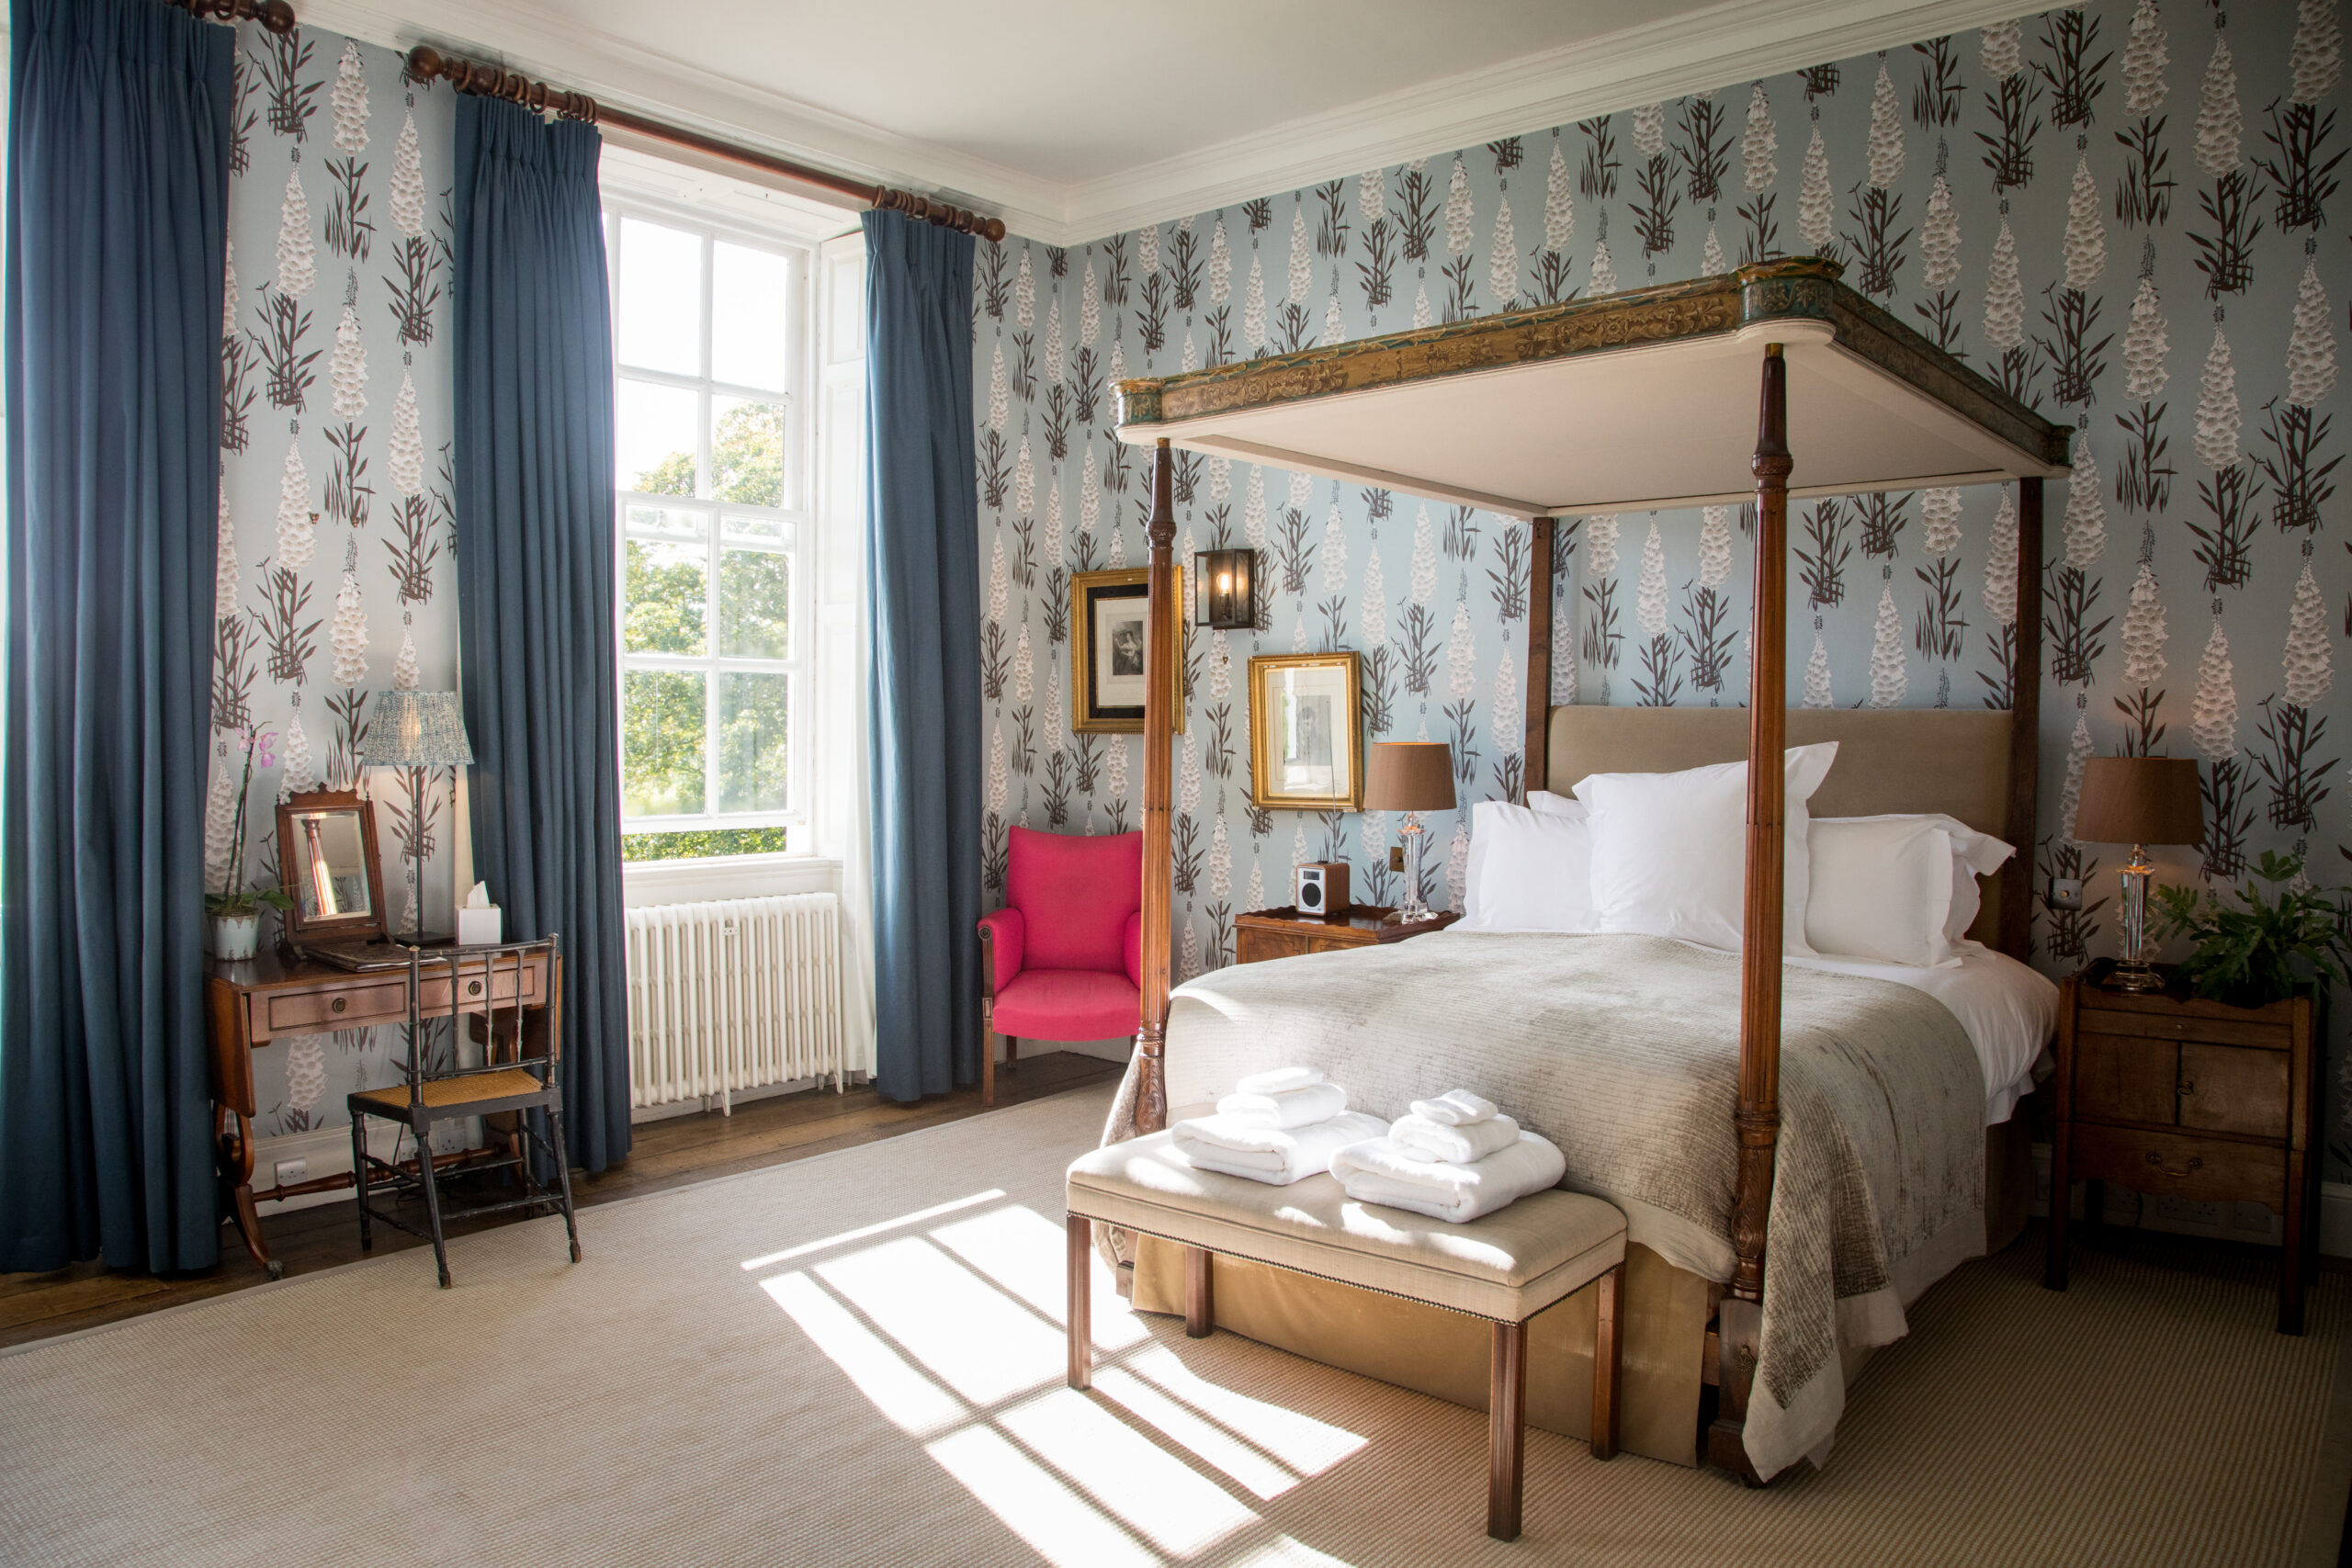 The Foxglove Bedroom at luxury wedding venue Iscoyd Park photographed by Helen Baly